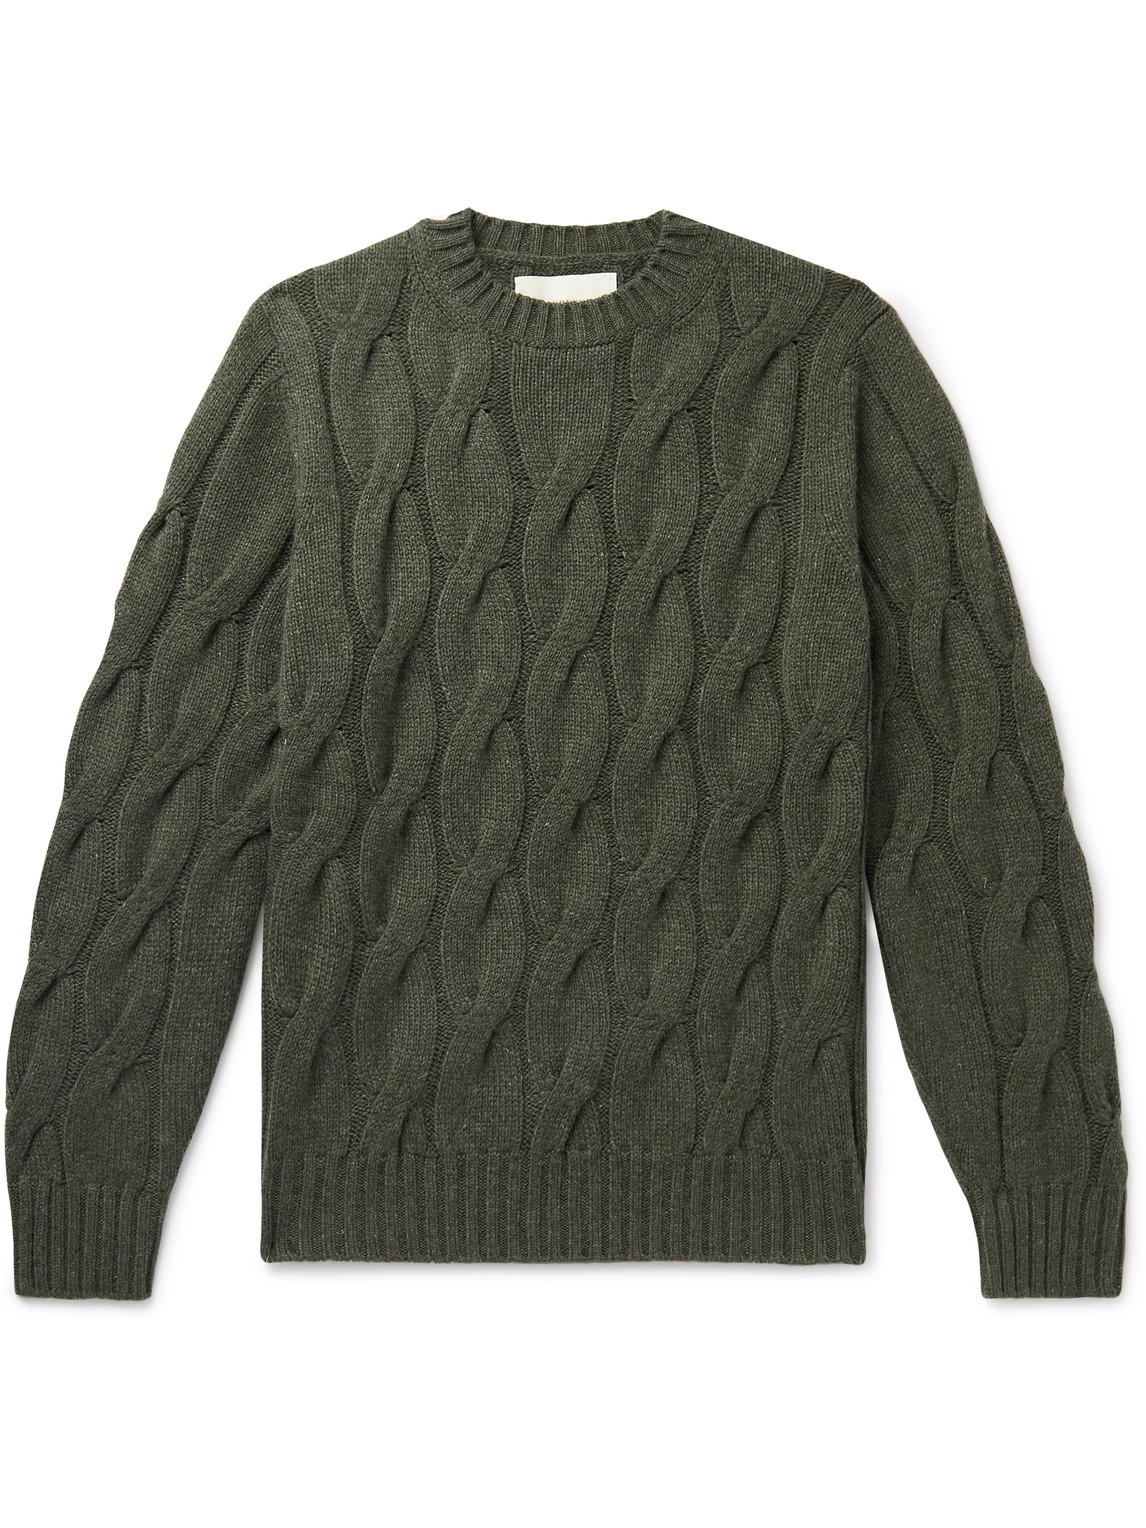 PURDEY CABLE-KNIT CASHMERE SWEATER